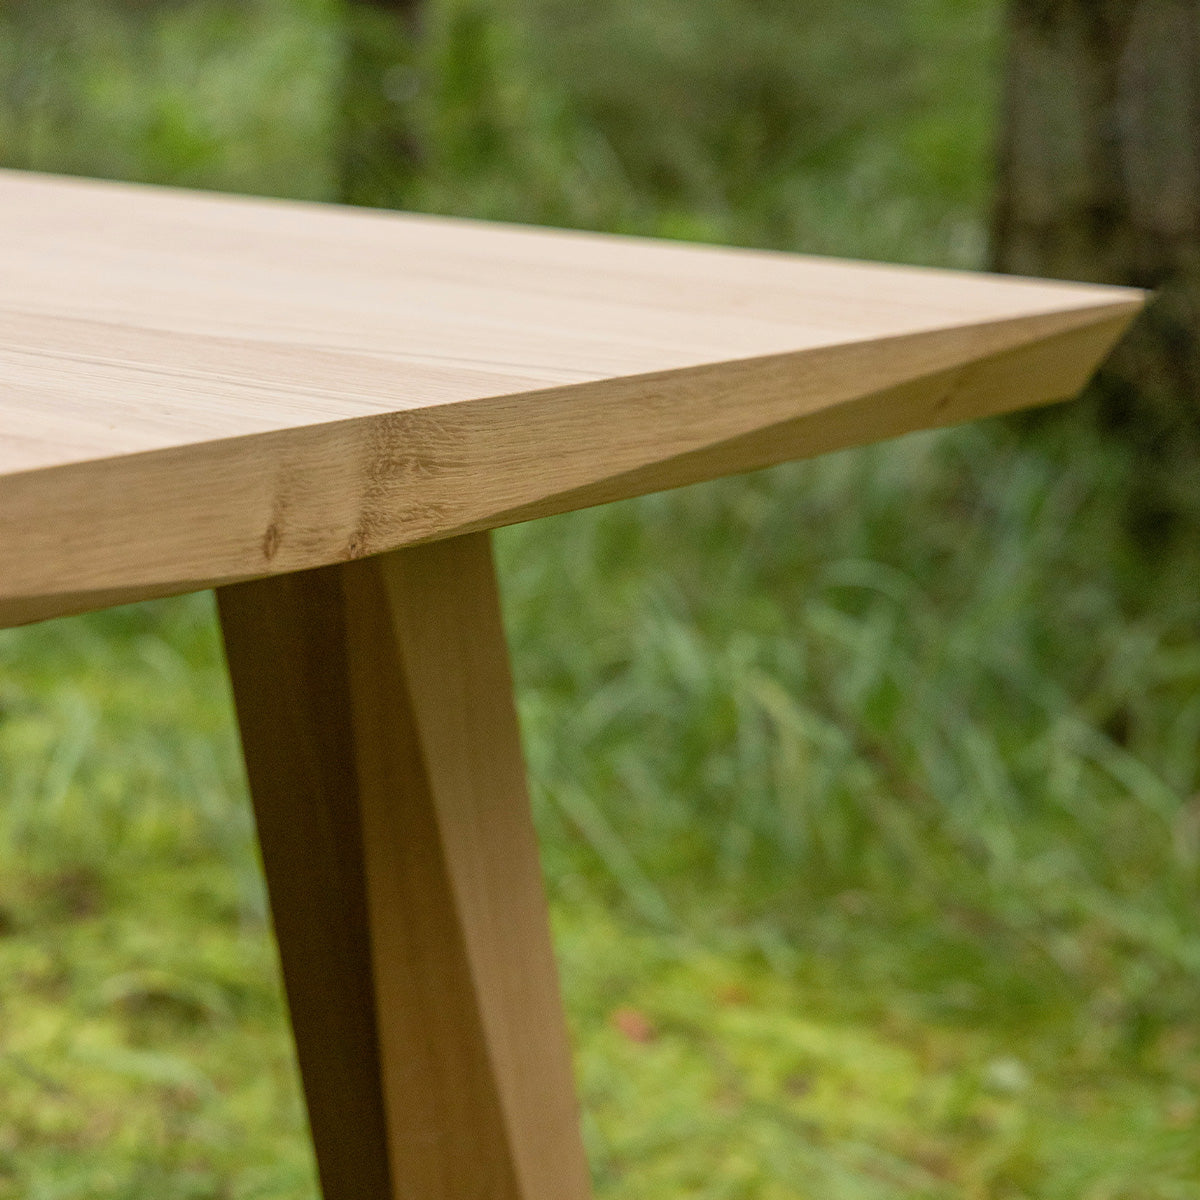 Edge Dining Table - 240x100 cm [Contract]